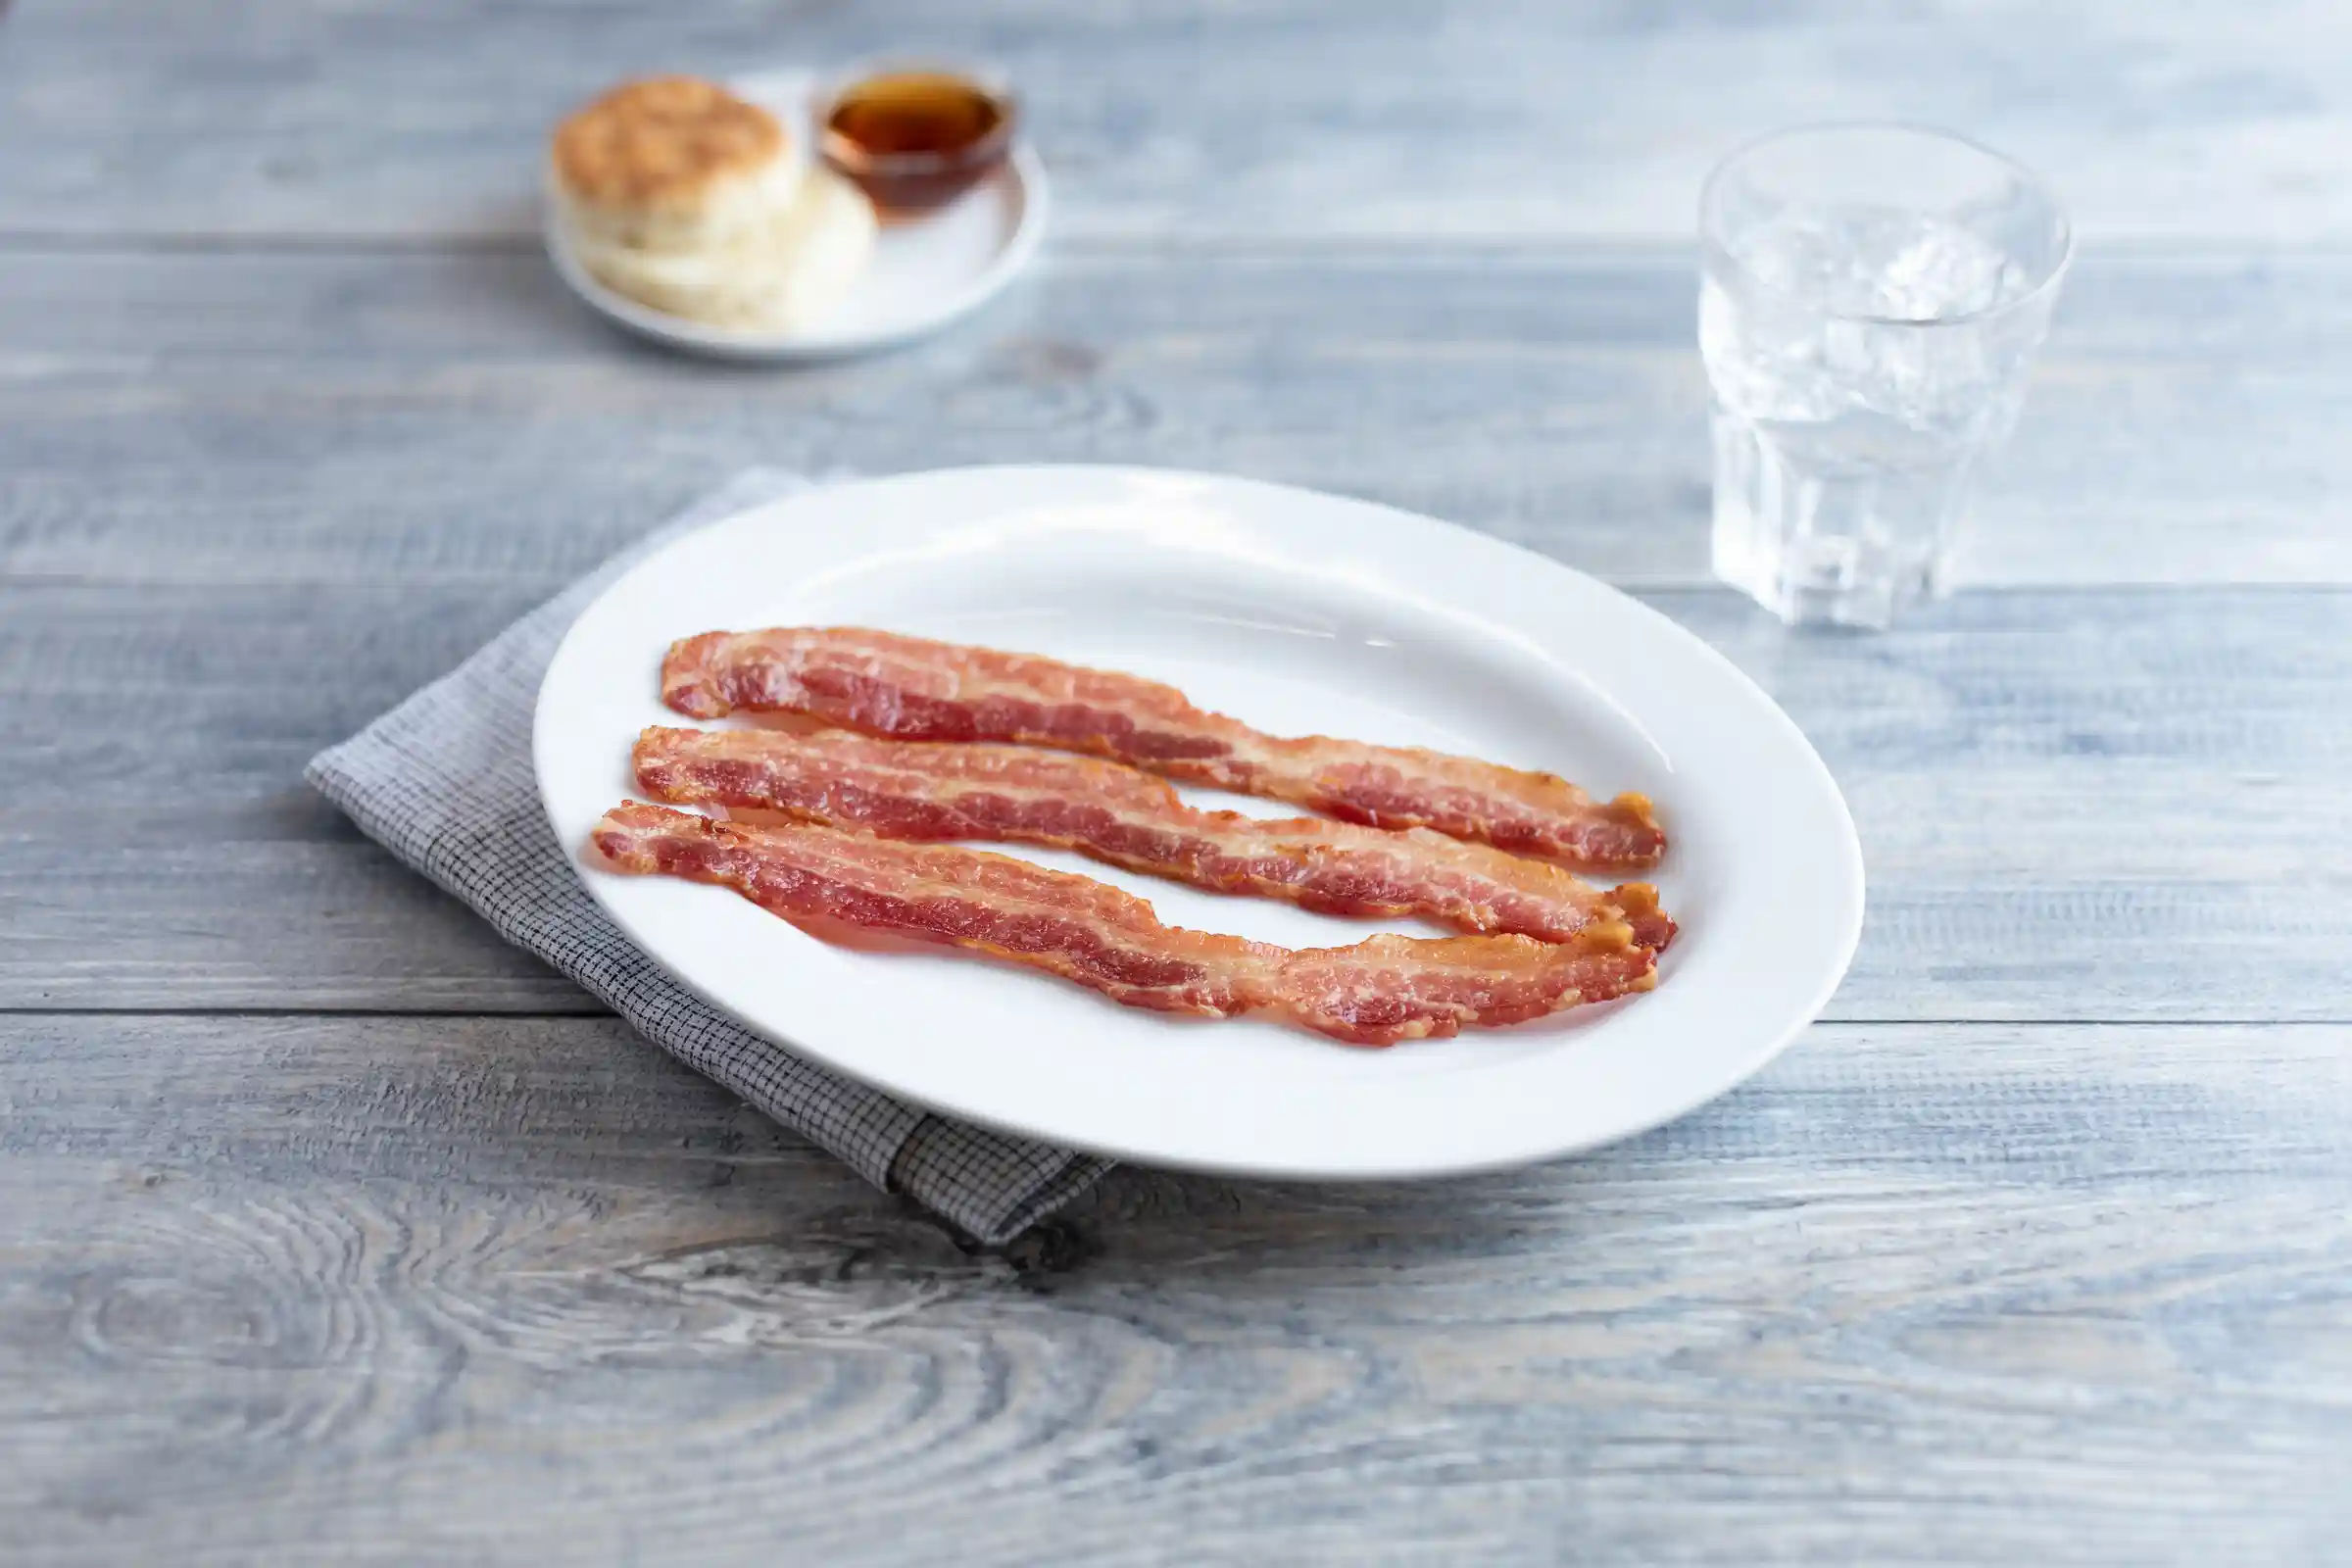 Wright® Brand Naturally Applewood Smoked Thin Sliced Bacon, Bulk, 15Lbs, 18-22 Slices per pound, Gas Flushed_image_01